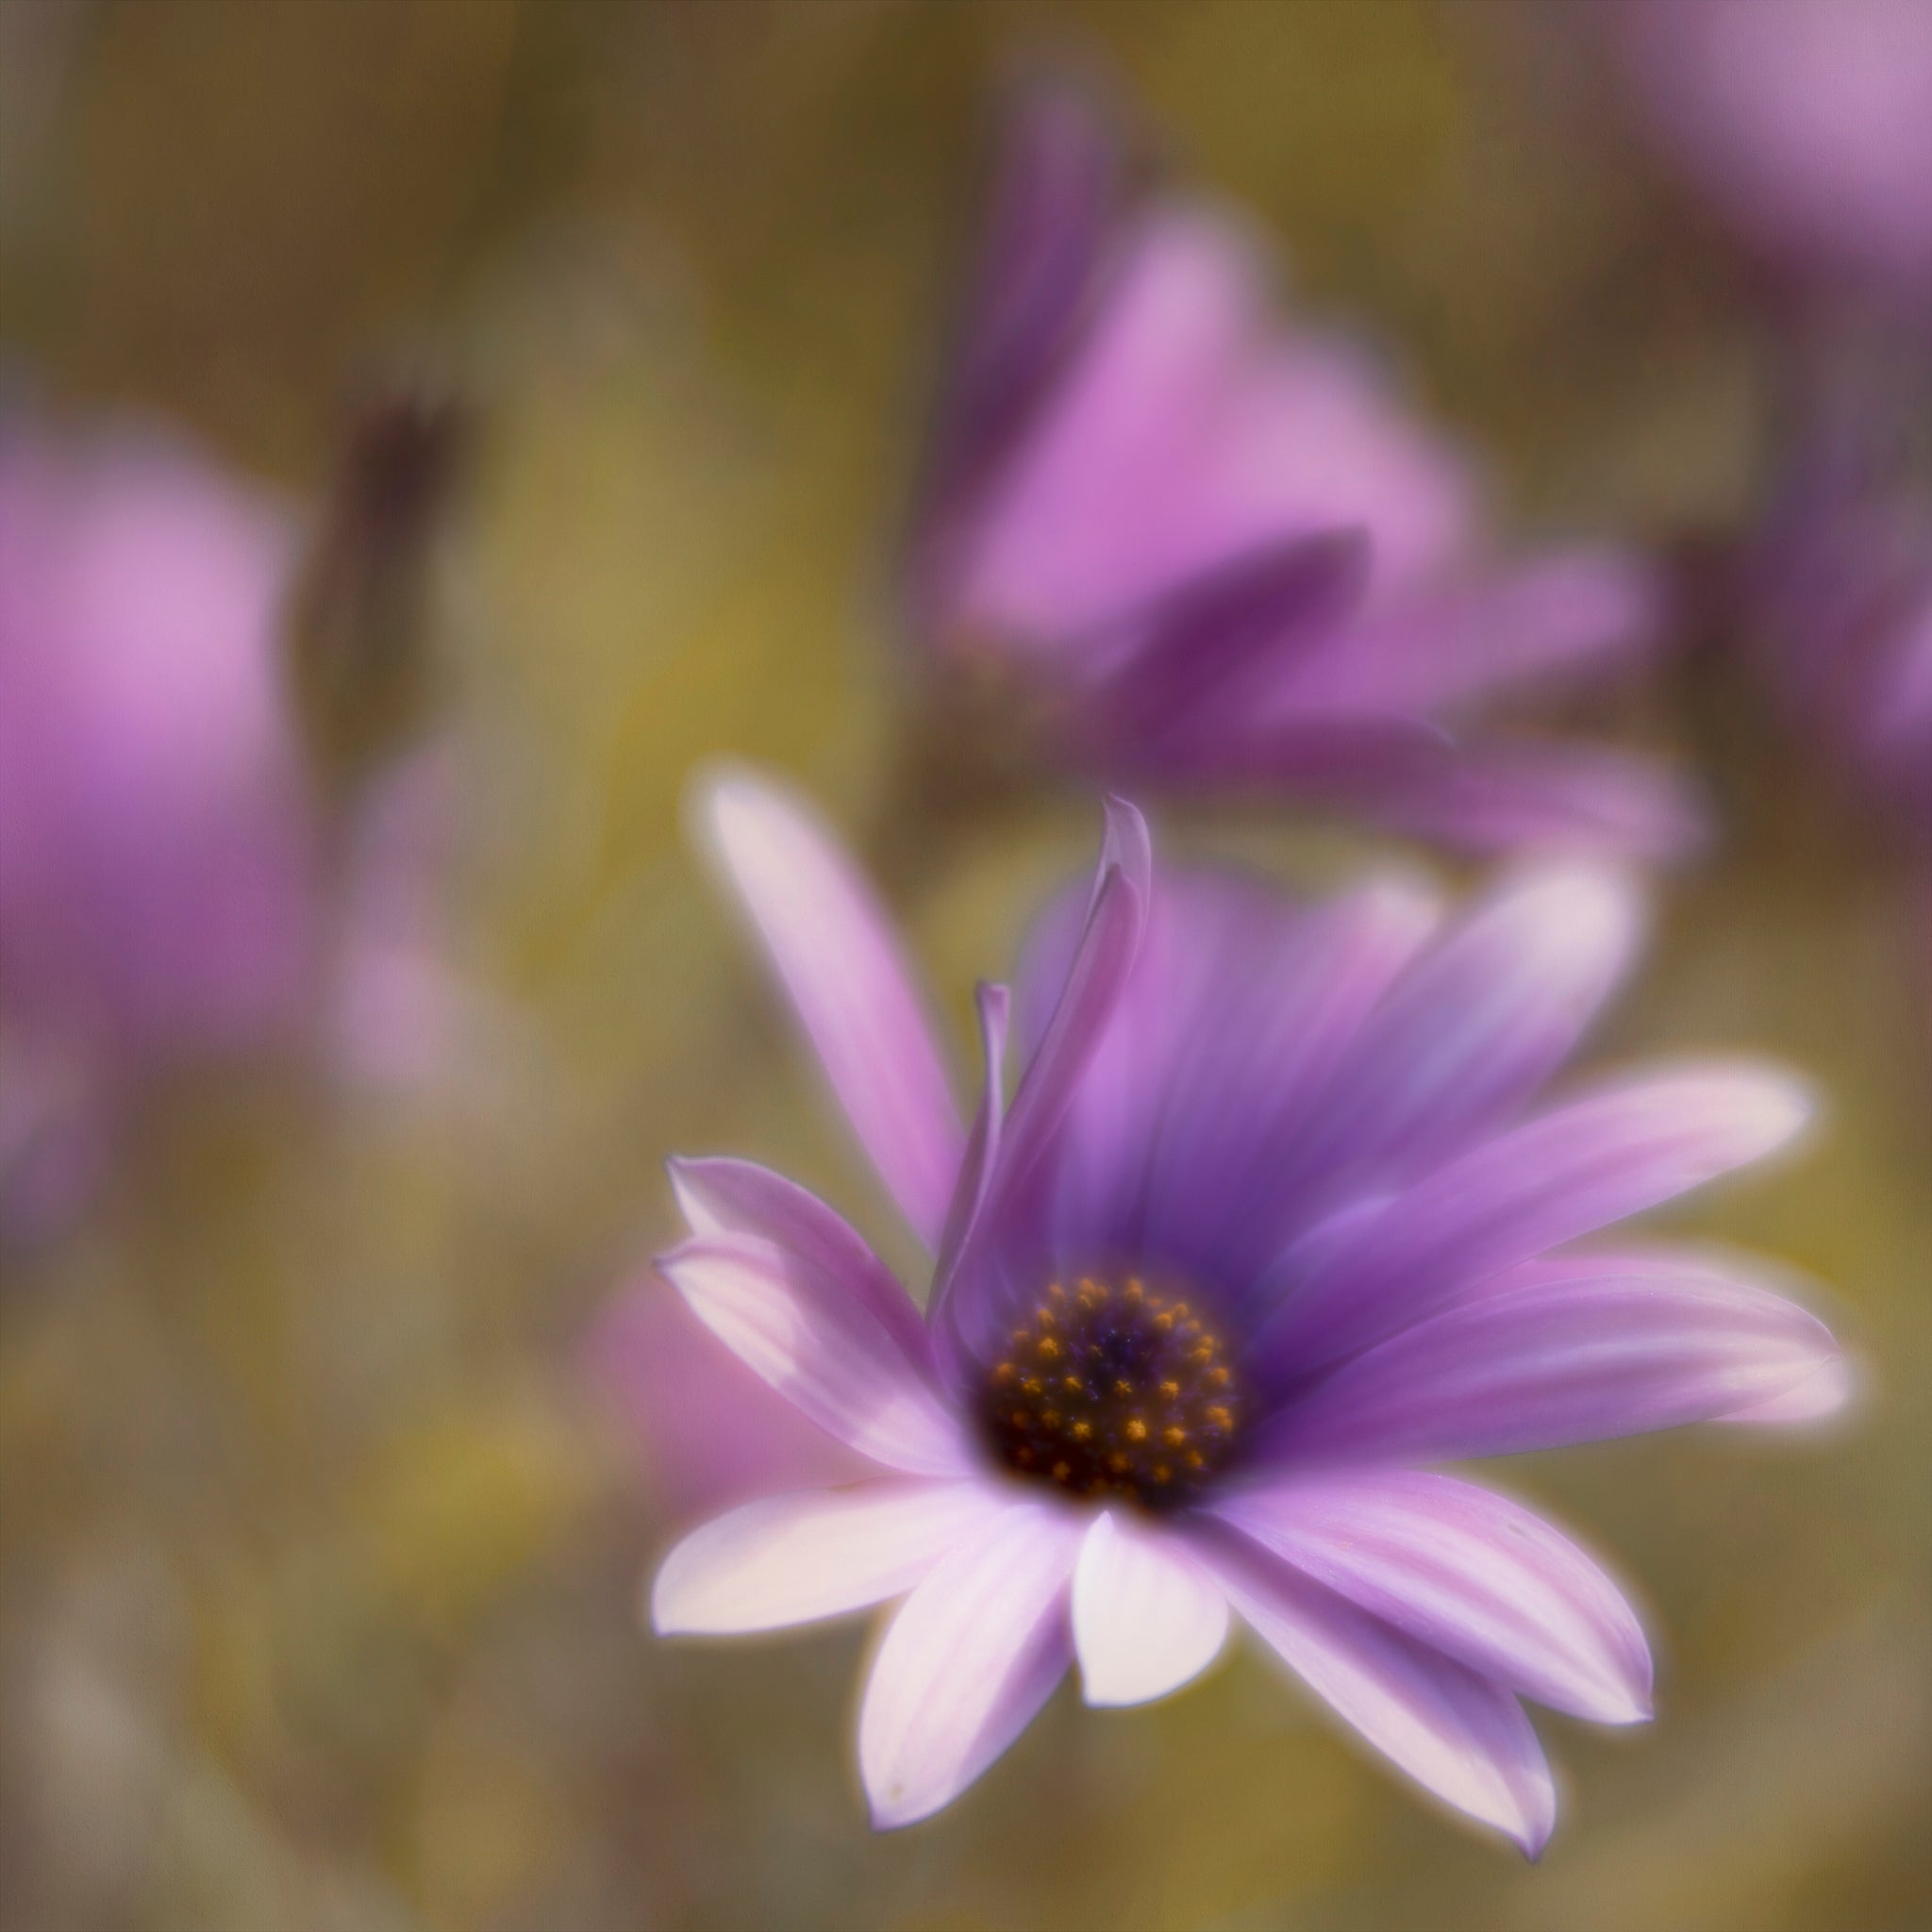 Fine art photograph of purple daisy blowing the in the wind. The photograph is by Cameron Dreaux. 